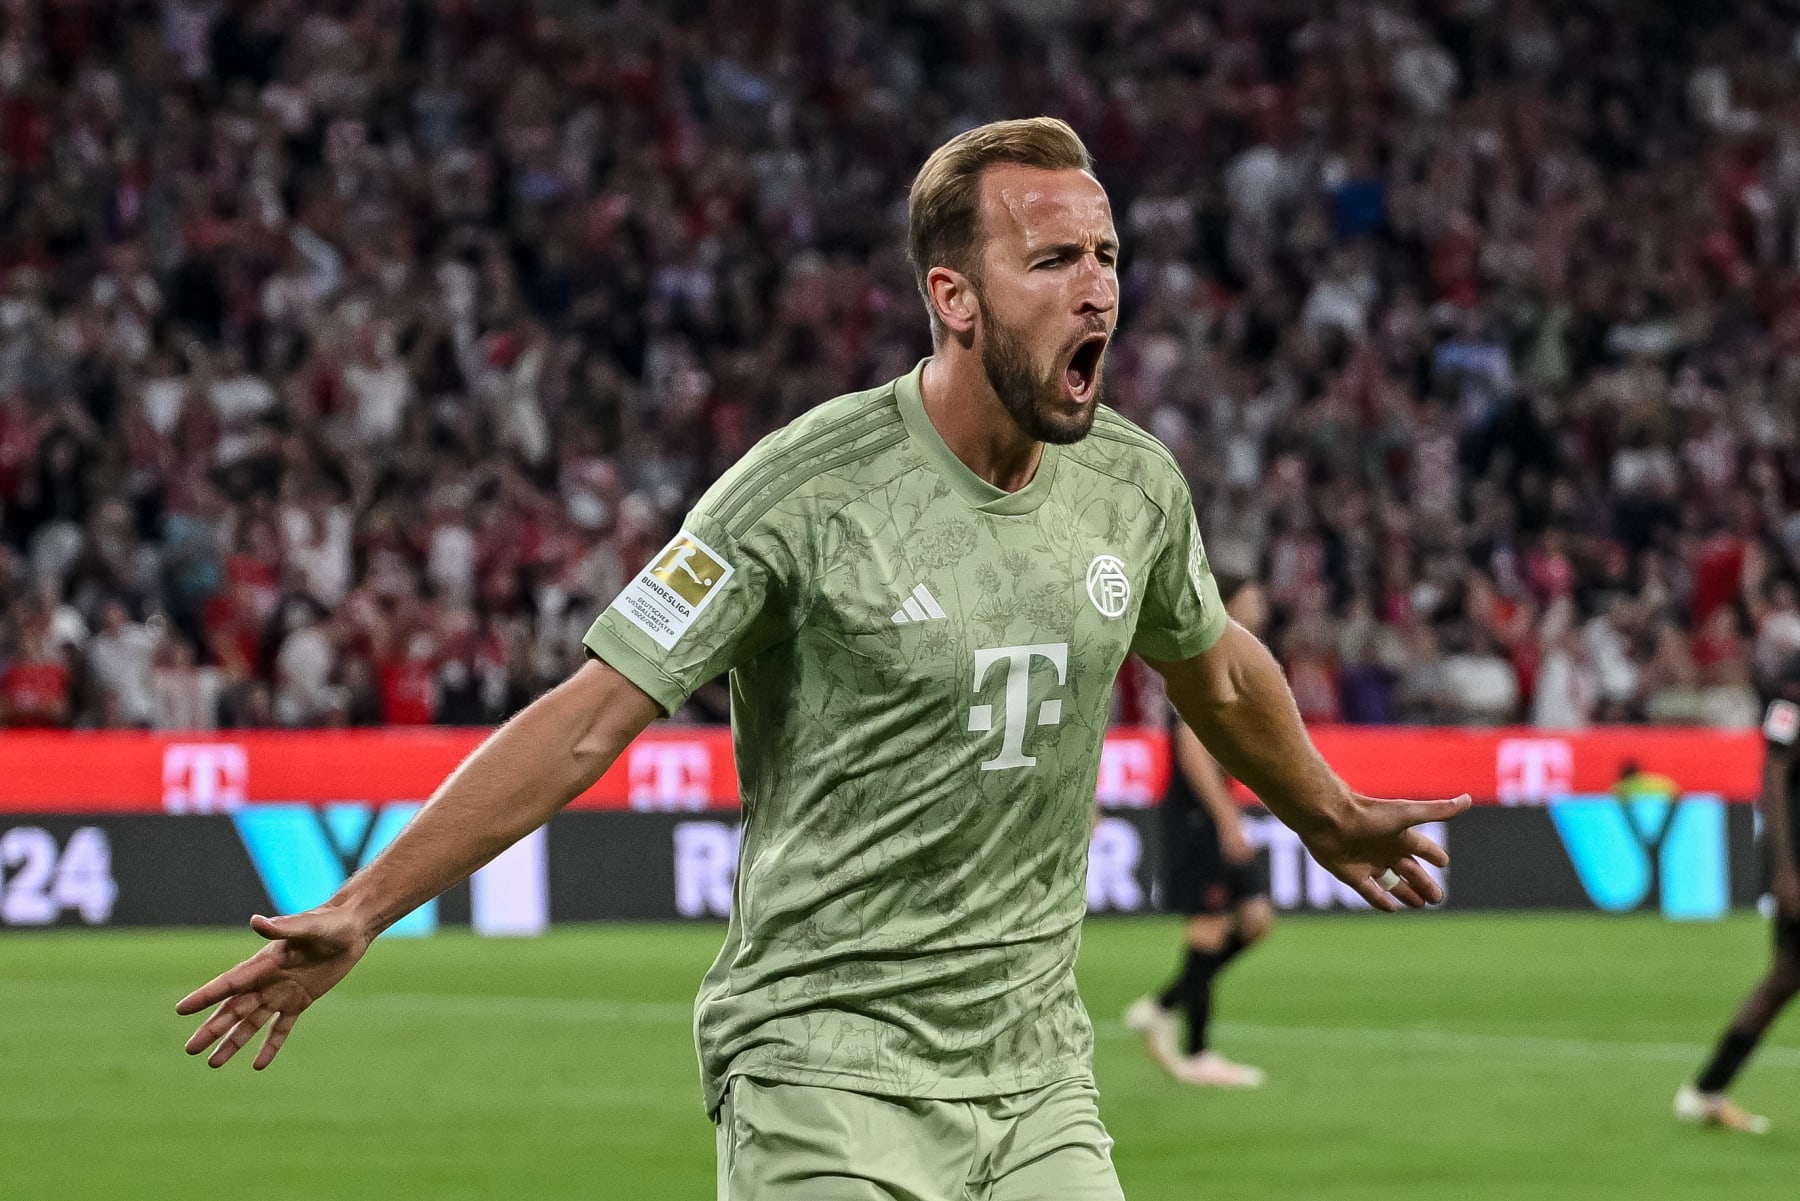 Best players in the UEFA Champions League 2023-24, ranked